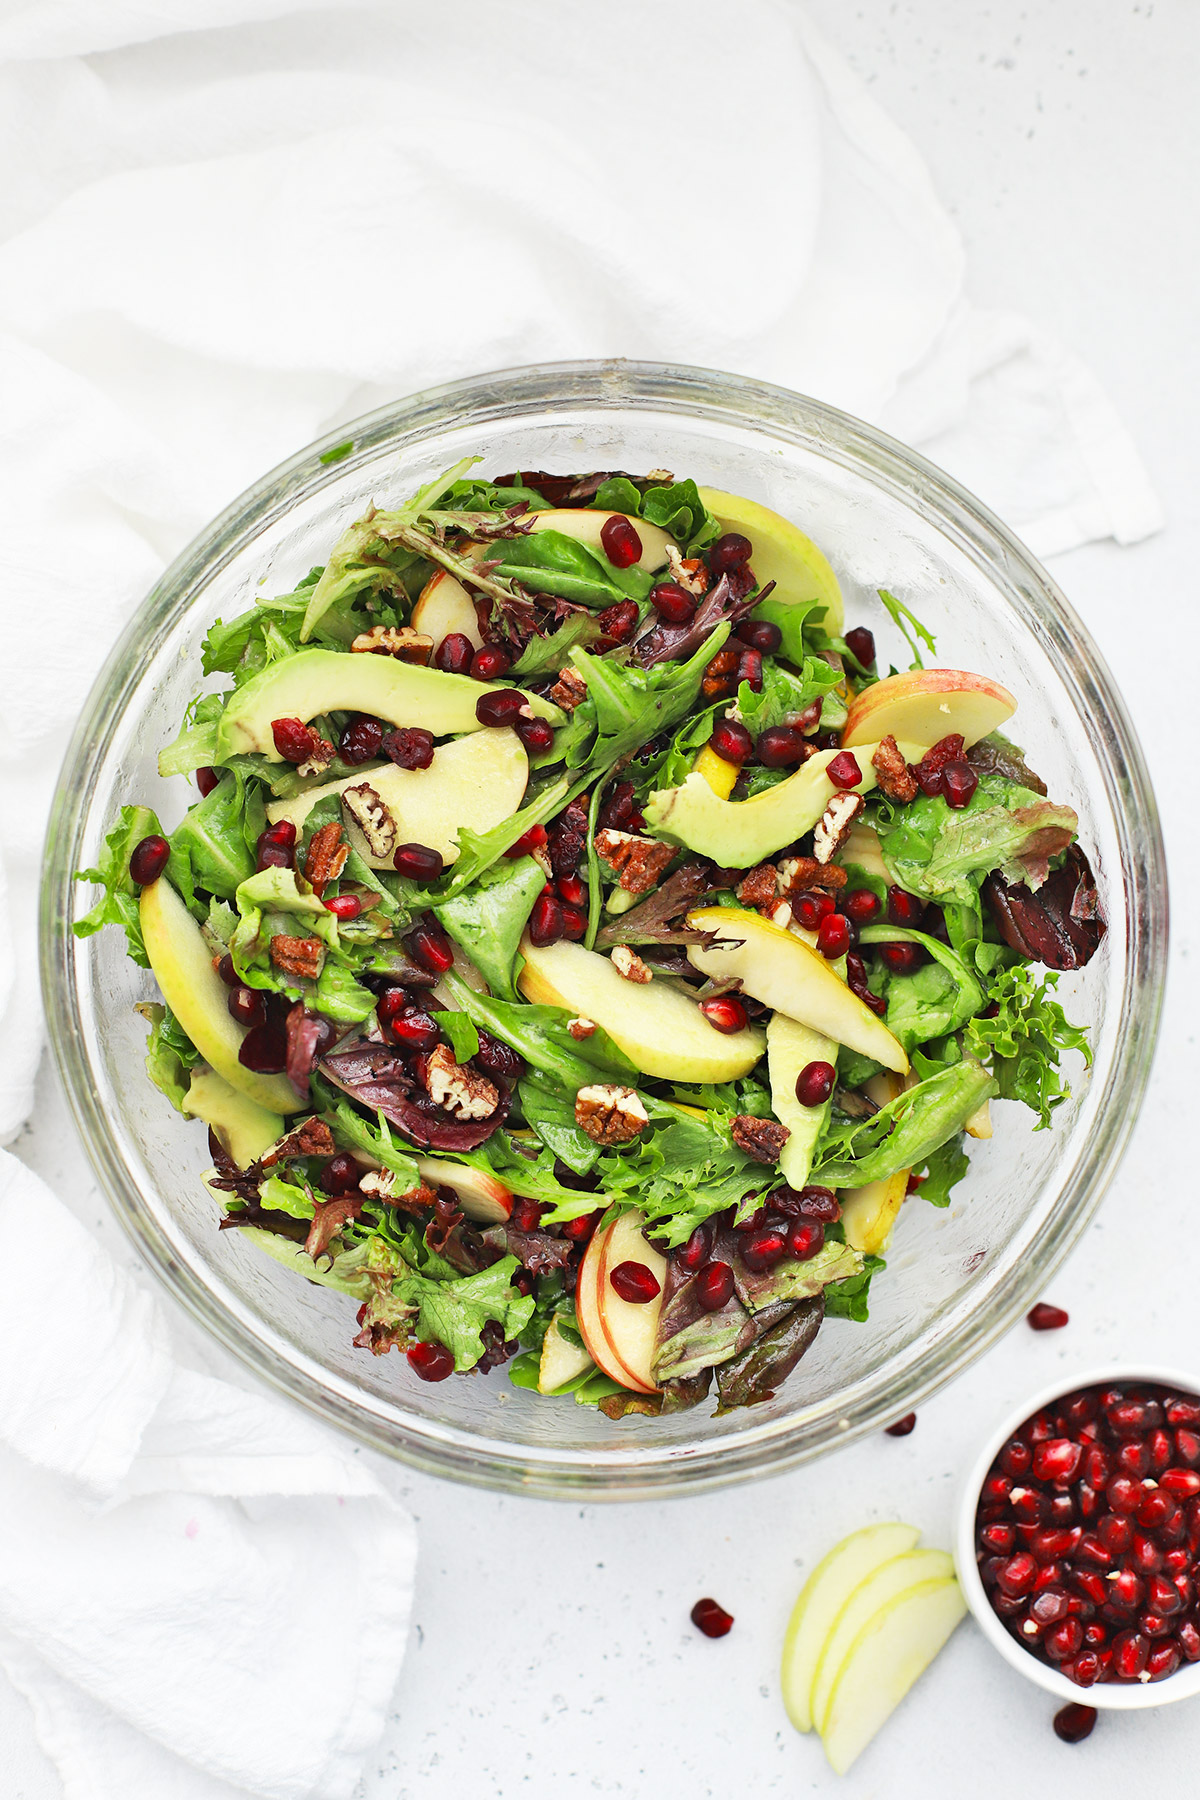 Overhead view of pear pomegranate salad in a glass bowl